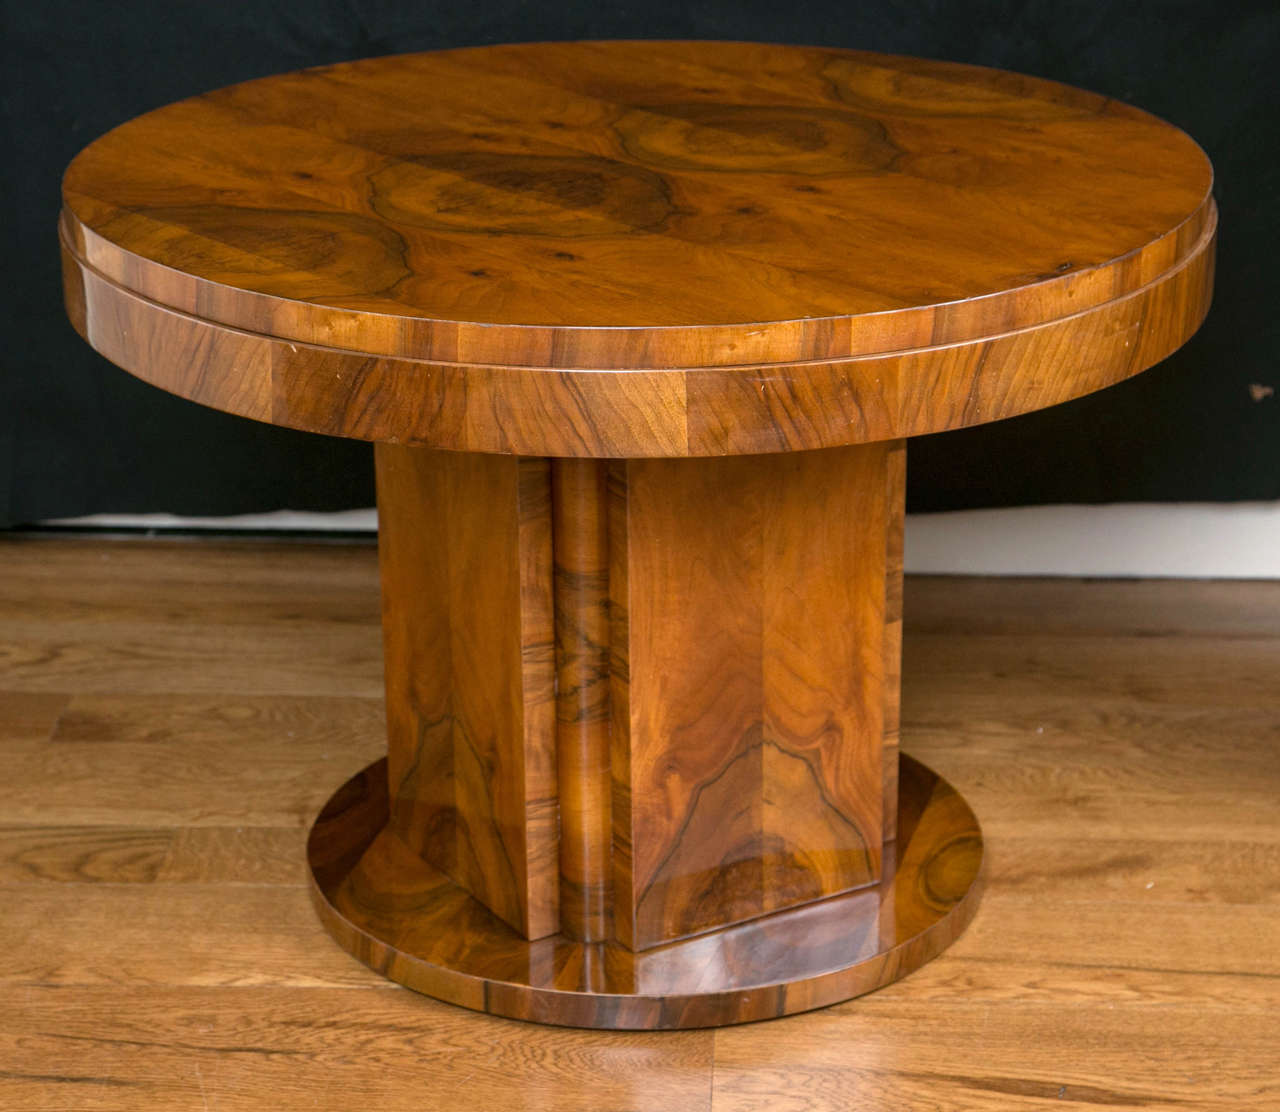 Superb art moderne round pedestal table with playful matchbook walnut veneer for use as a side or coffee table, 1930s.
Recently French polished.